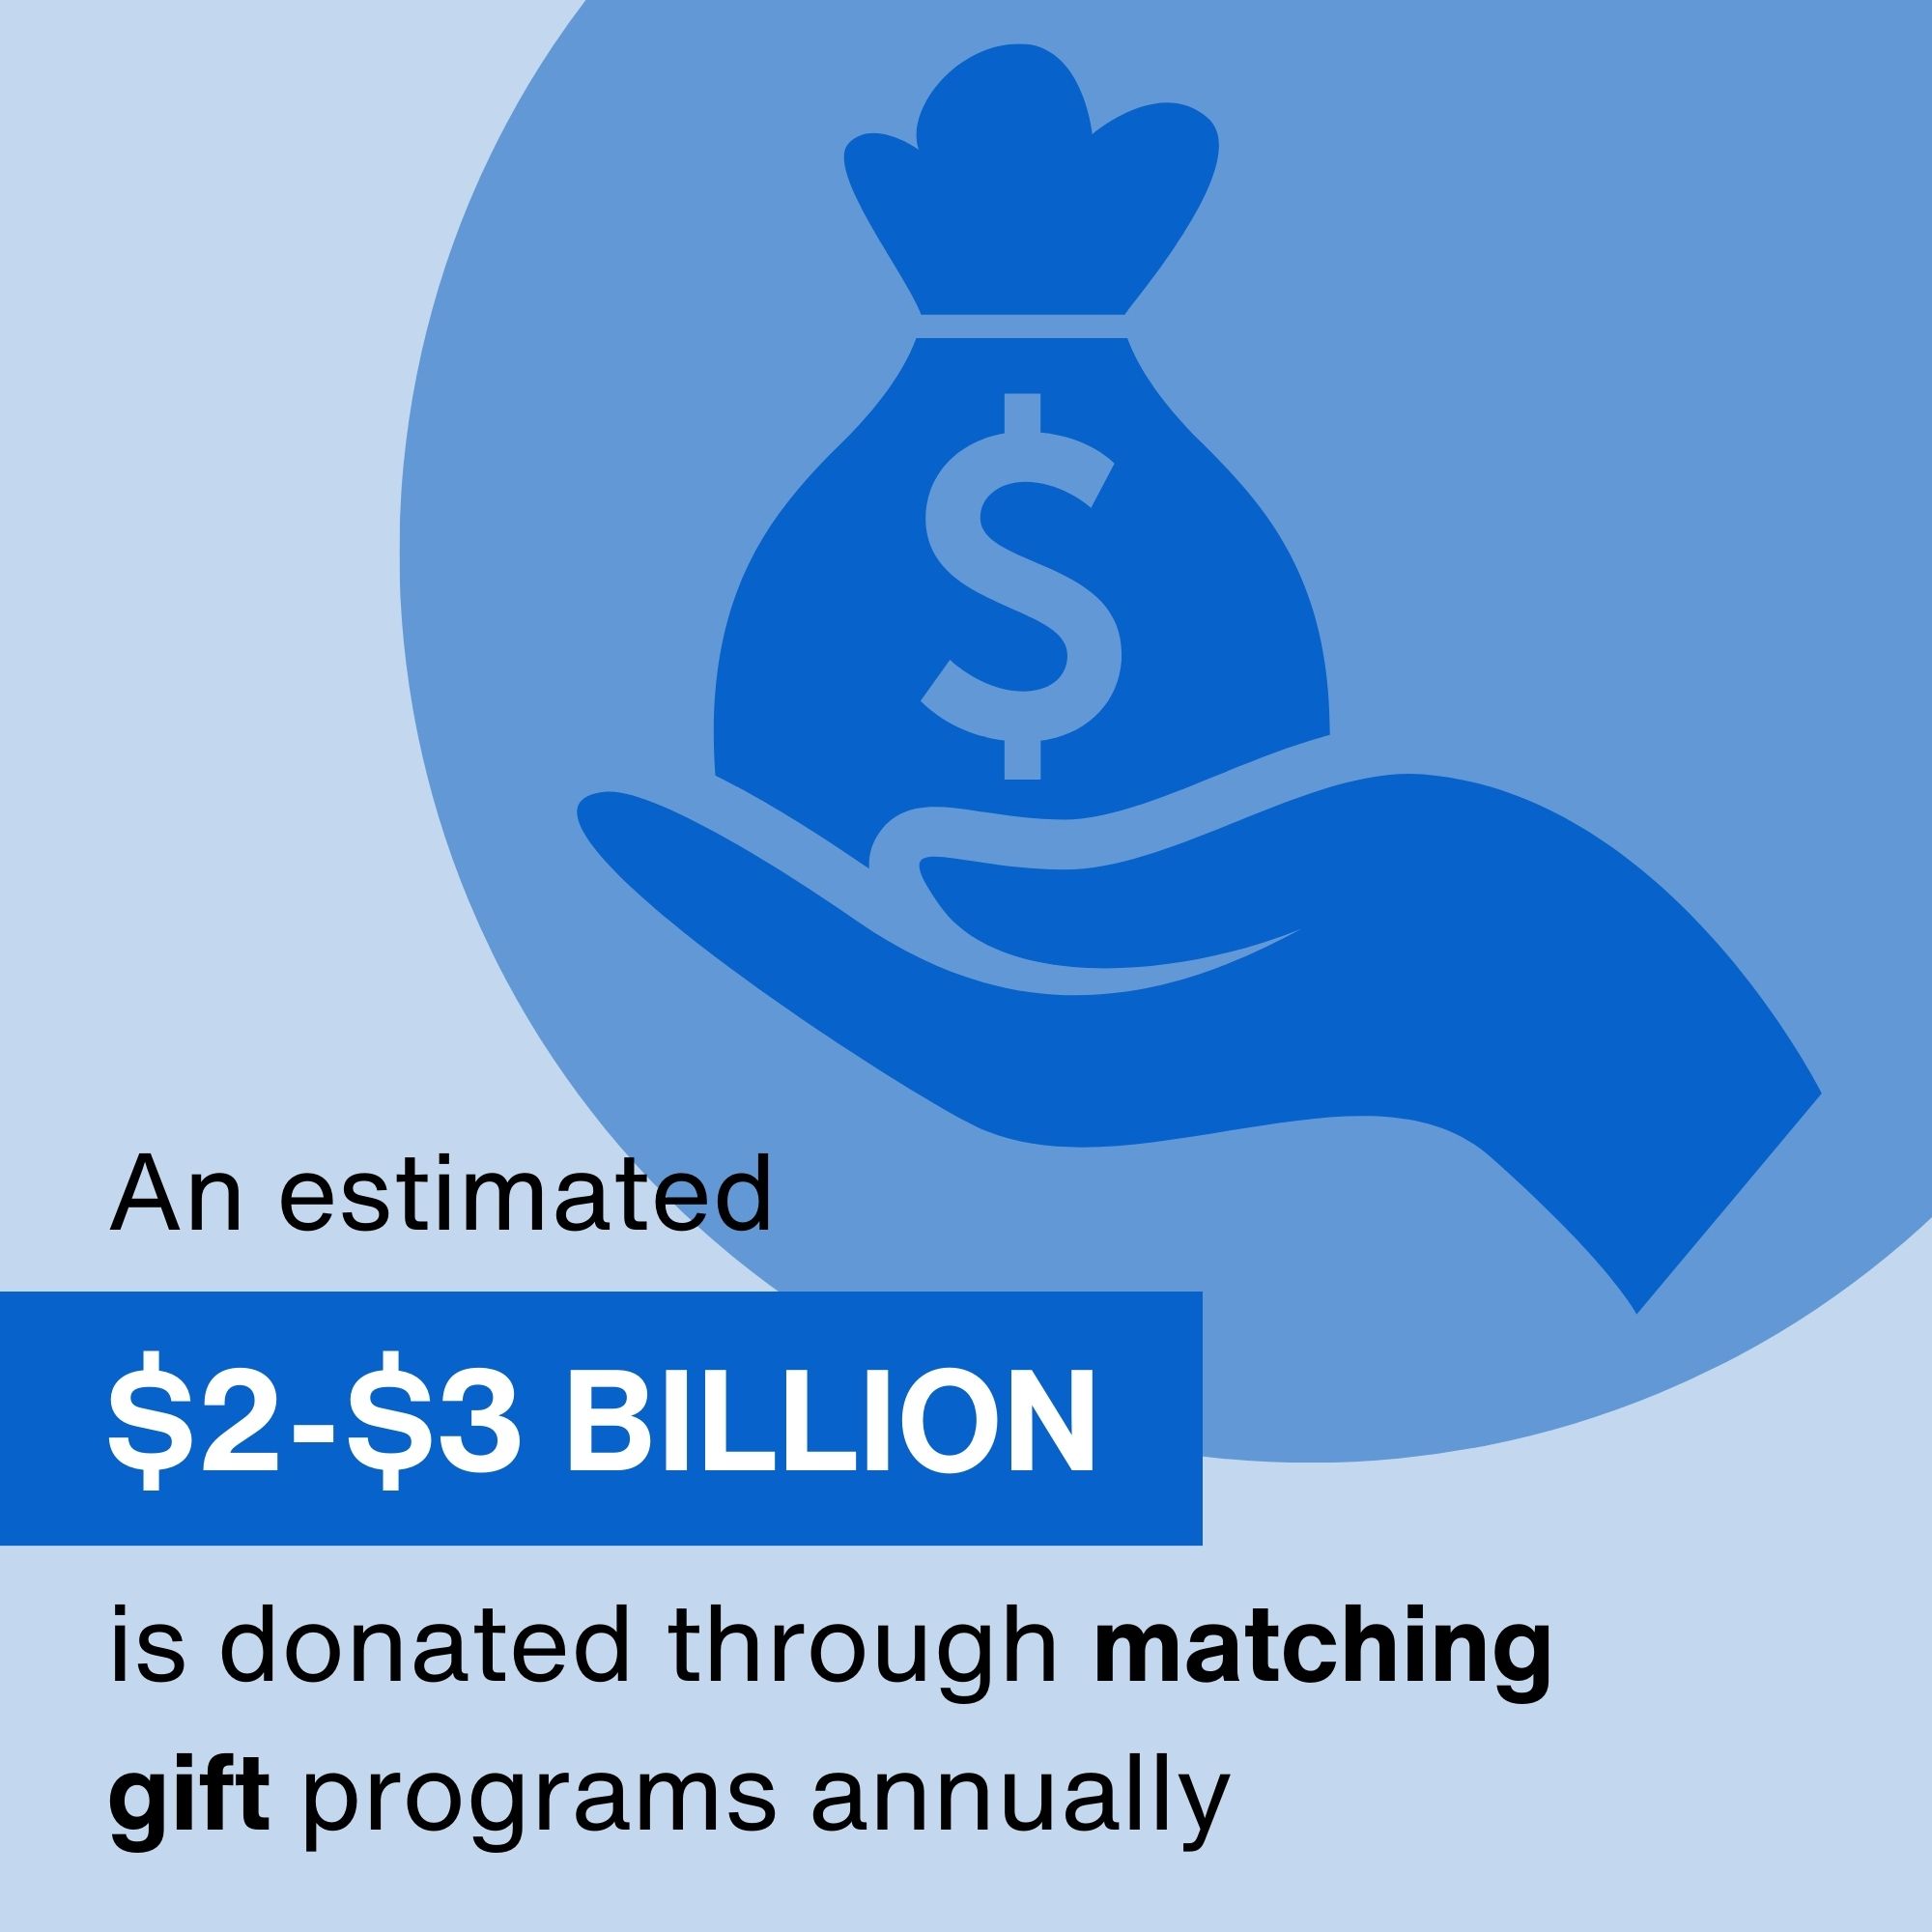 An estimated $2-$3 billion is donated through matching gift programs annually